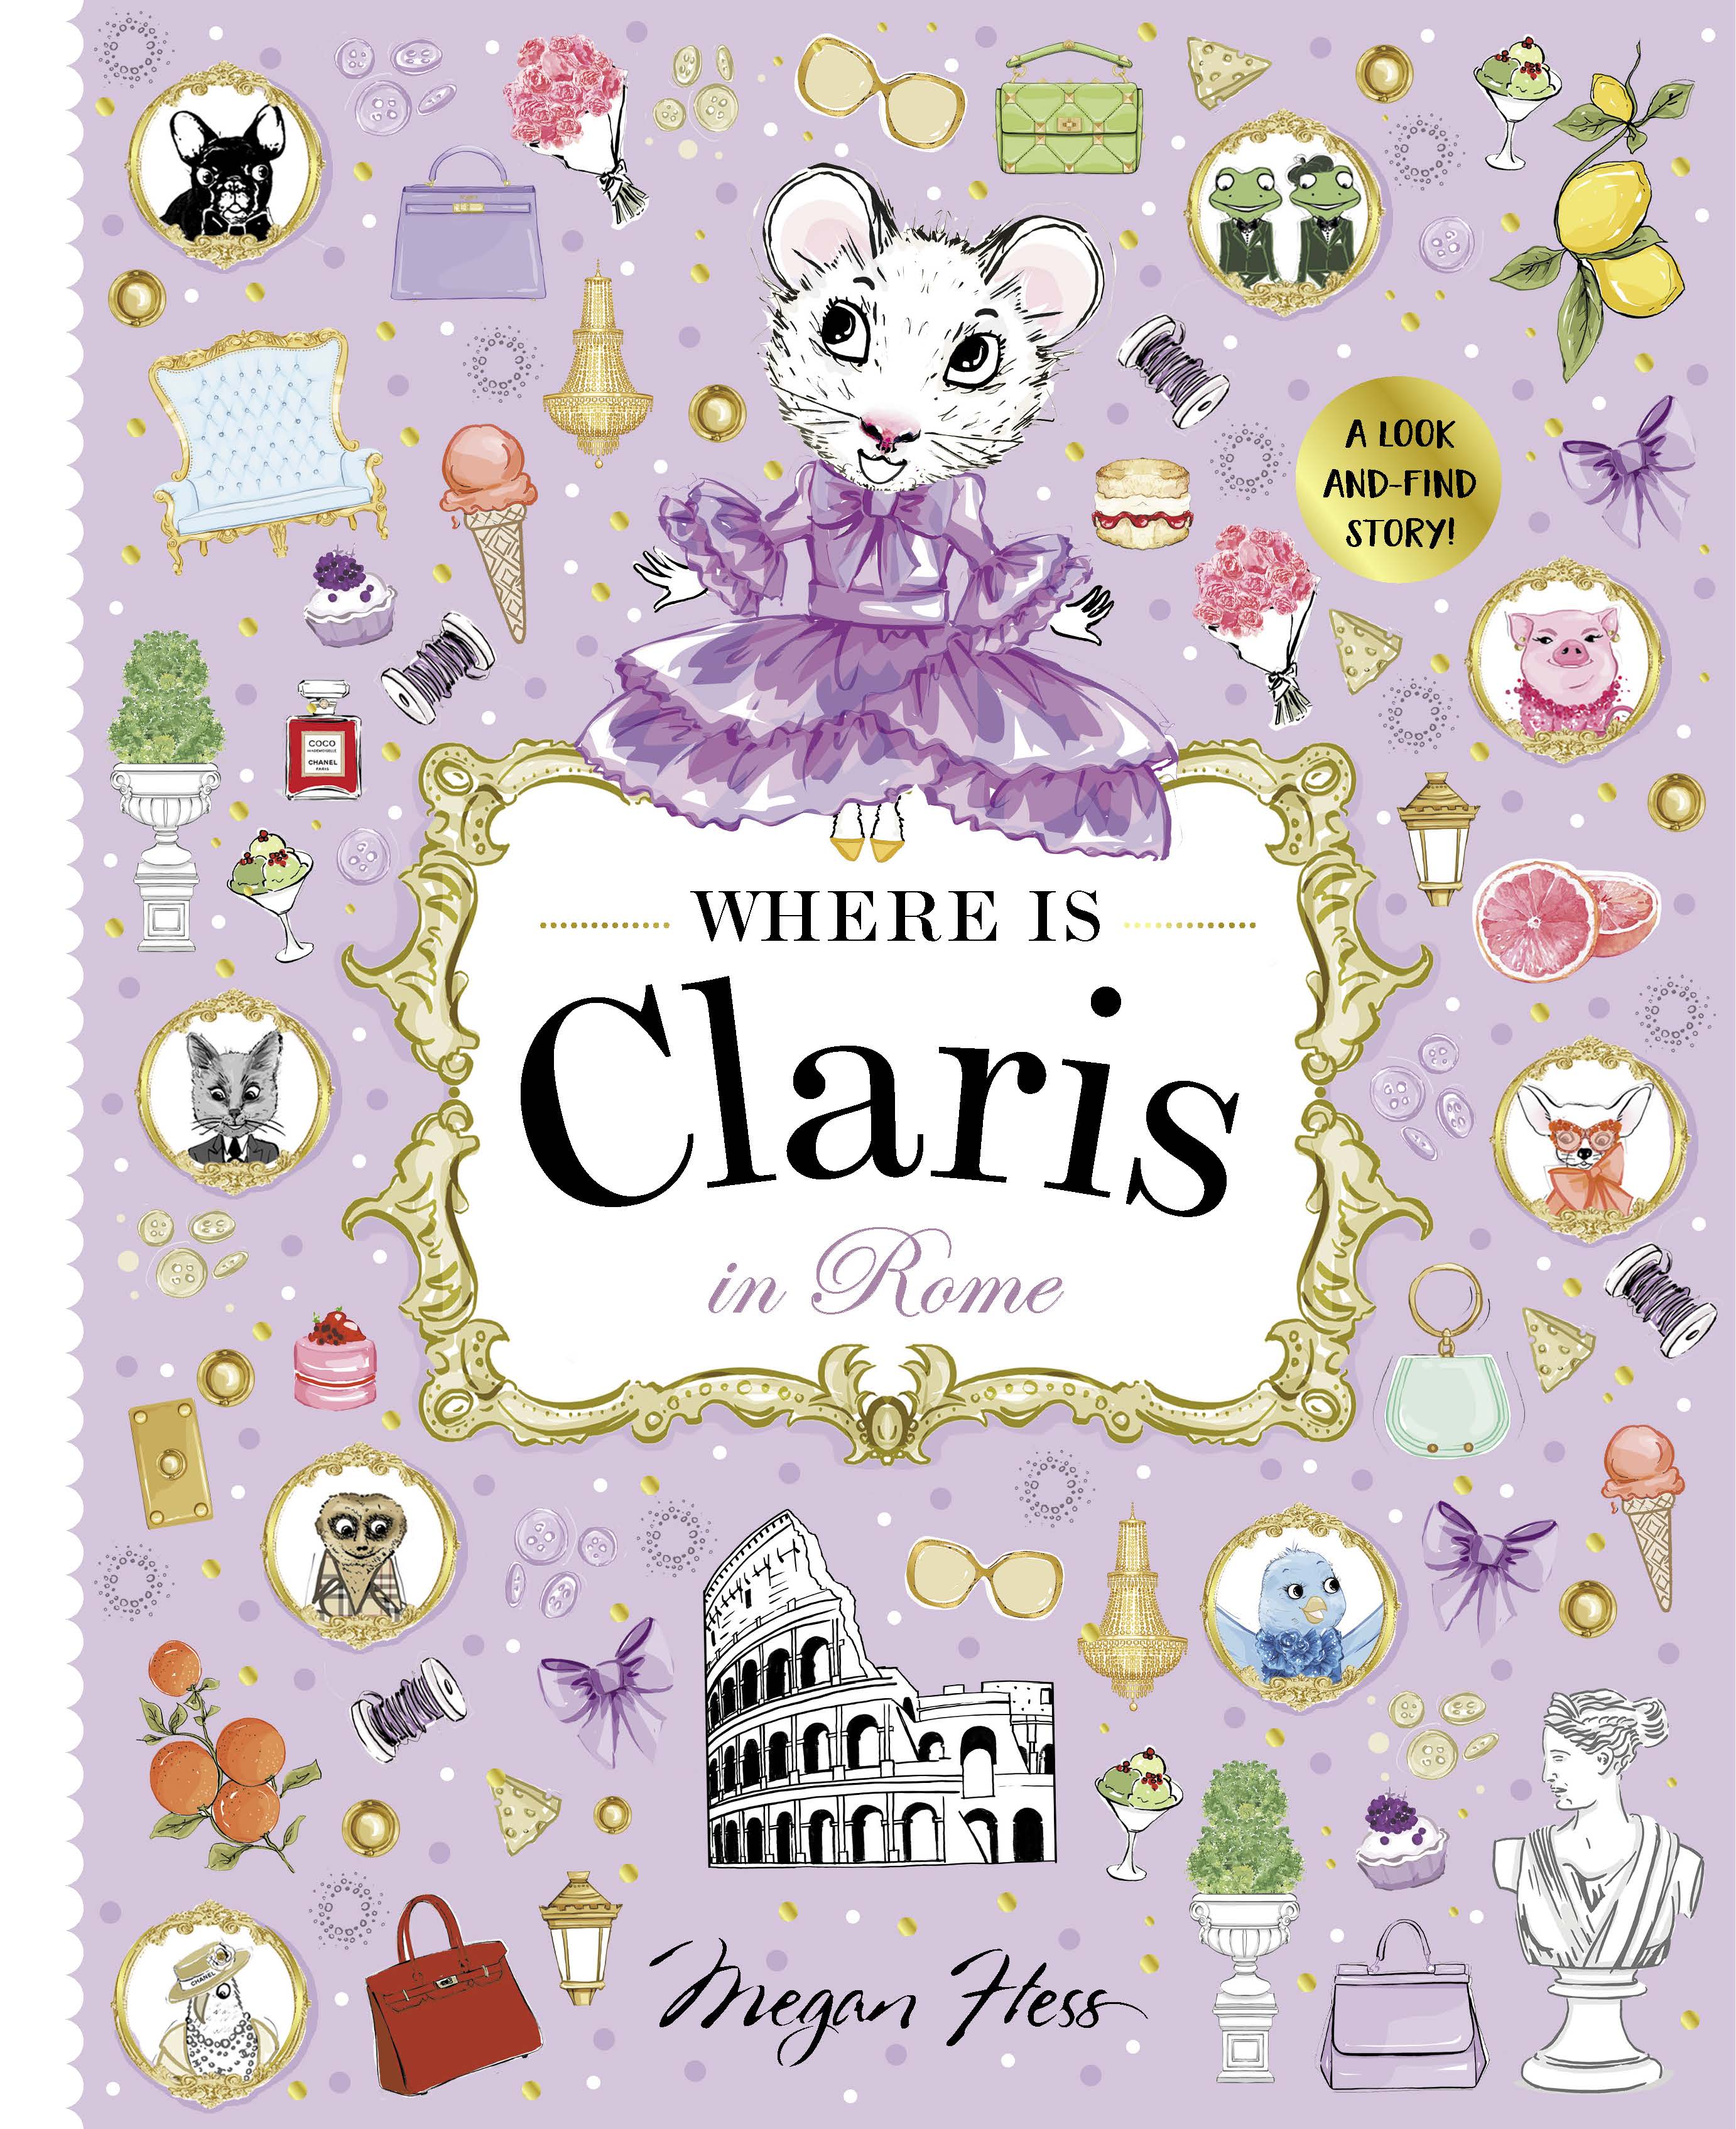 Where is Claris in Rome! : Claris: A Look-and-find Story!